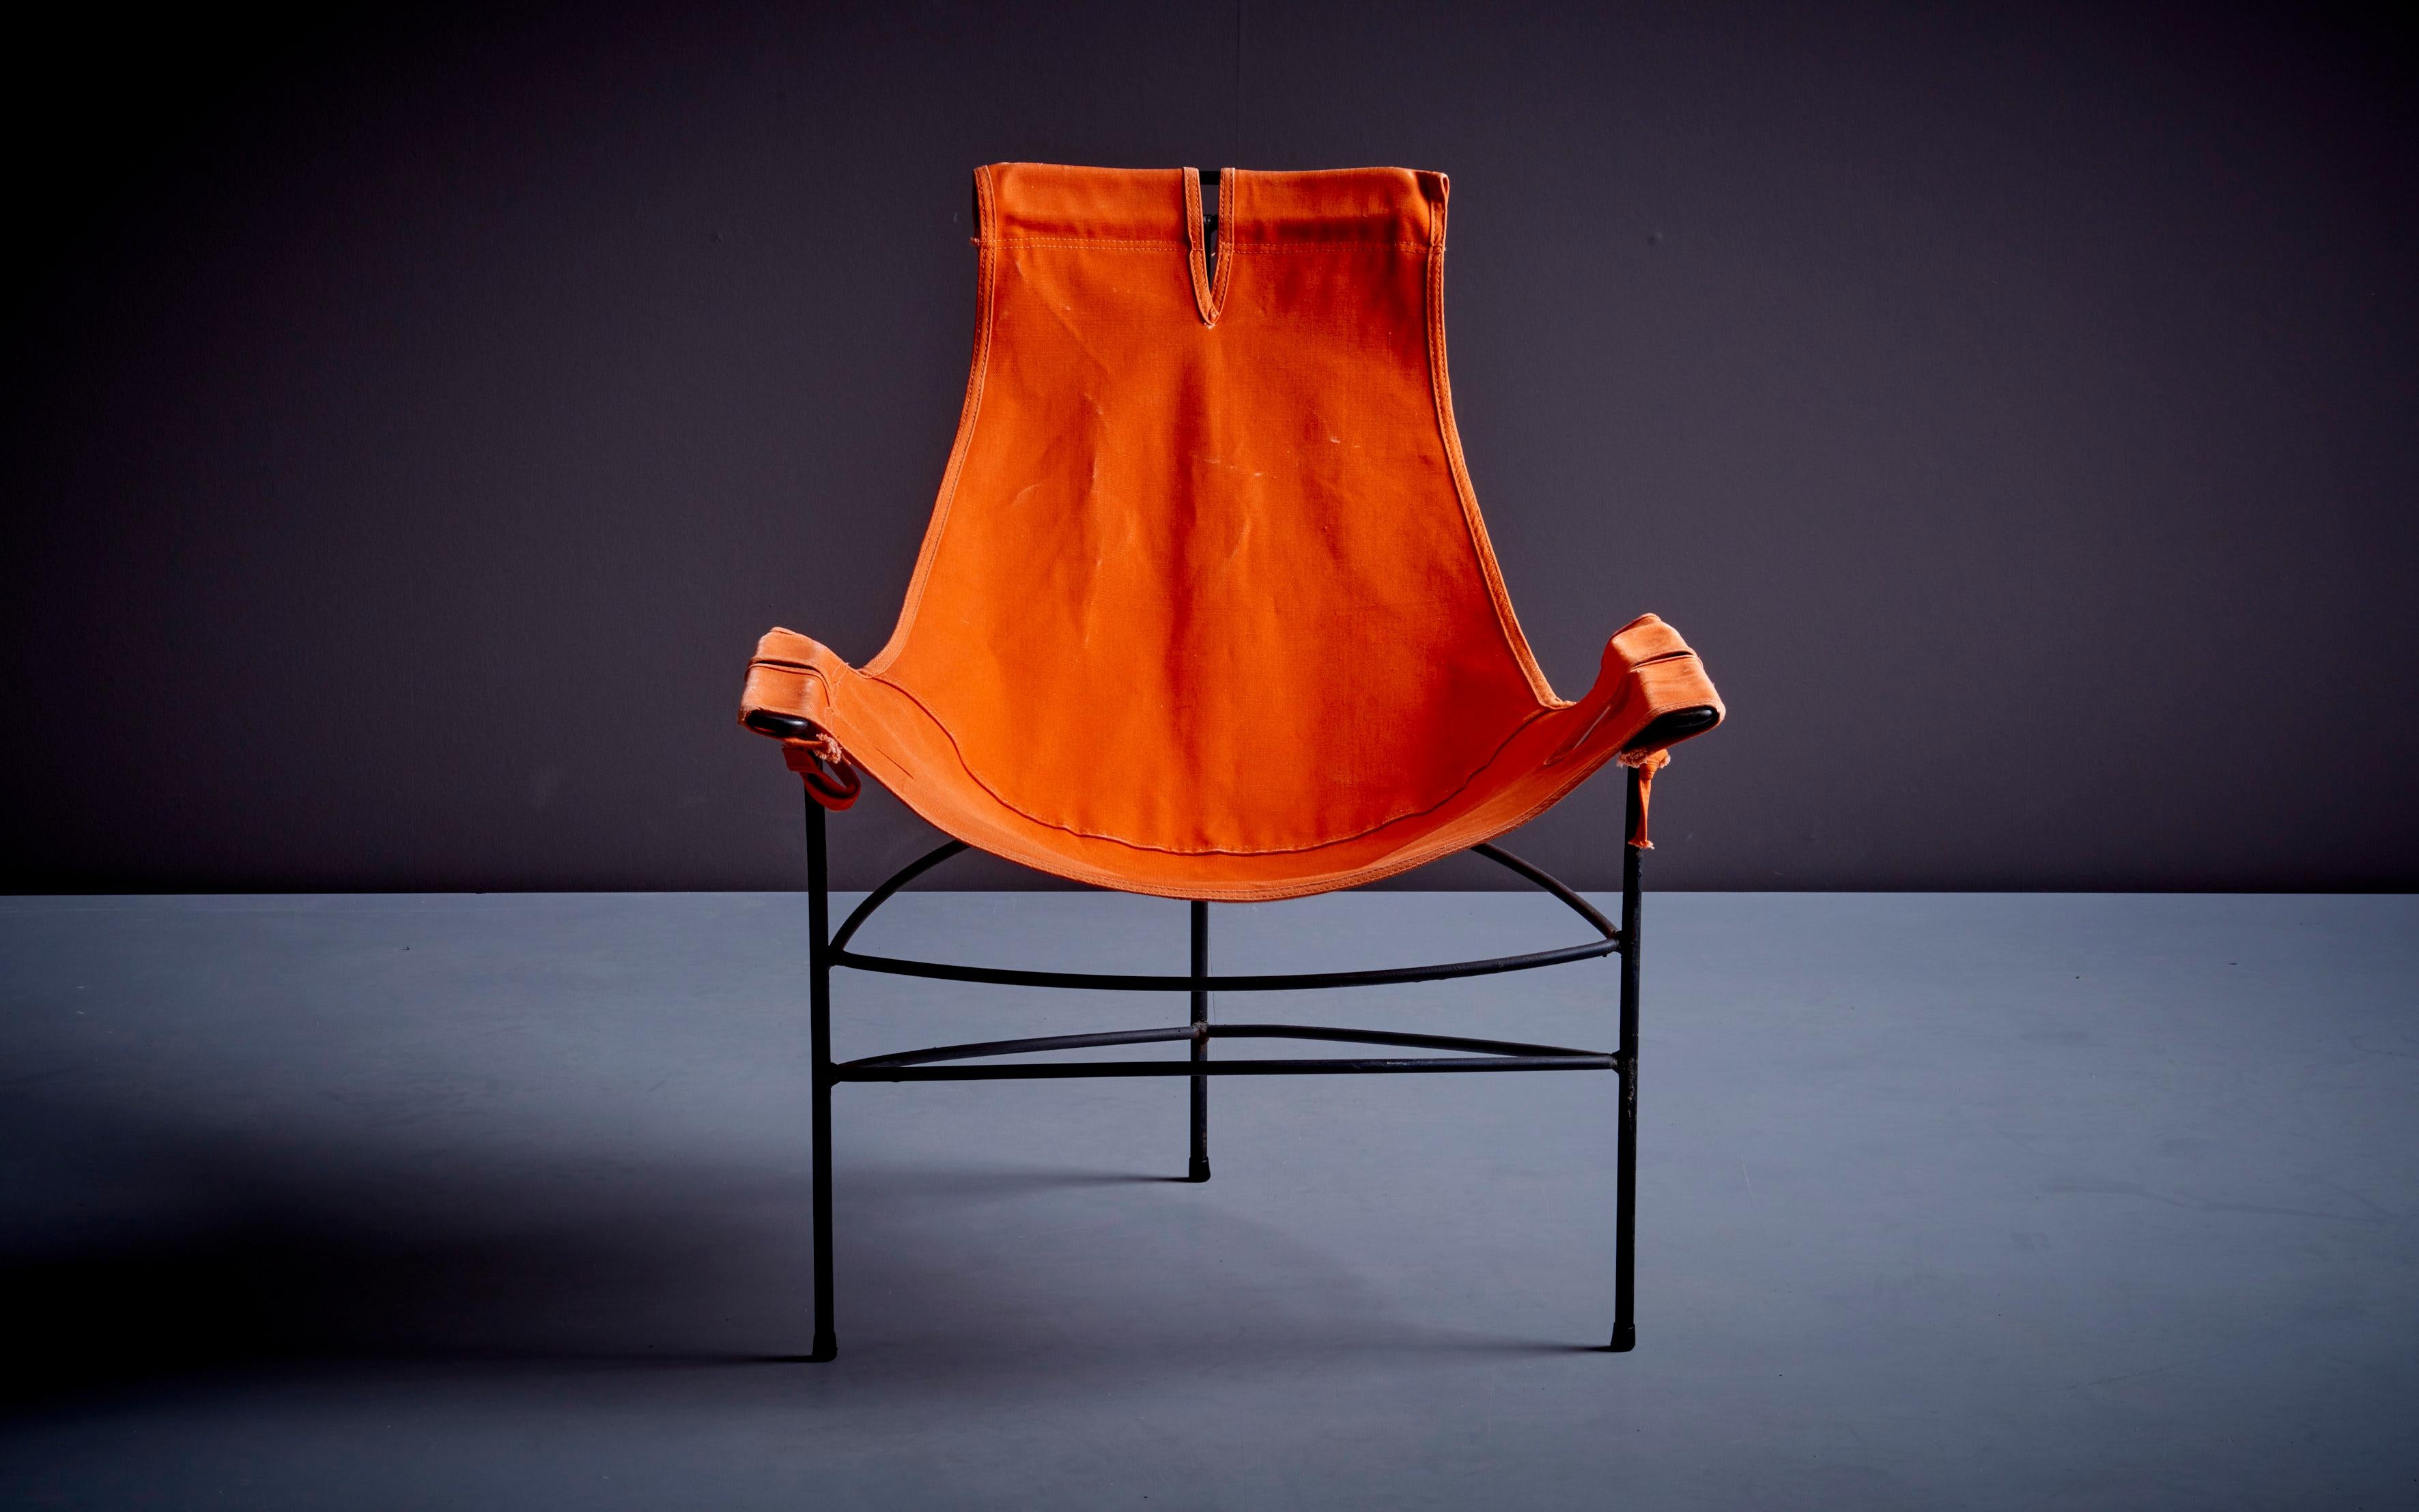 Pair of 2 lounge chairs by Jerry Johnson in orange canvas, USA, 1950s.